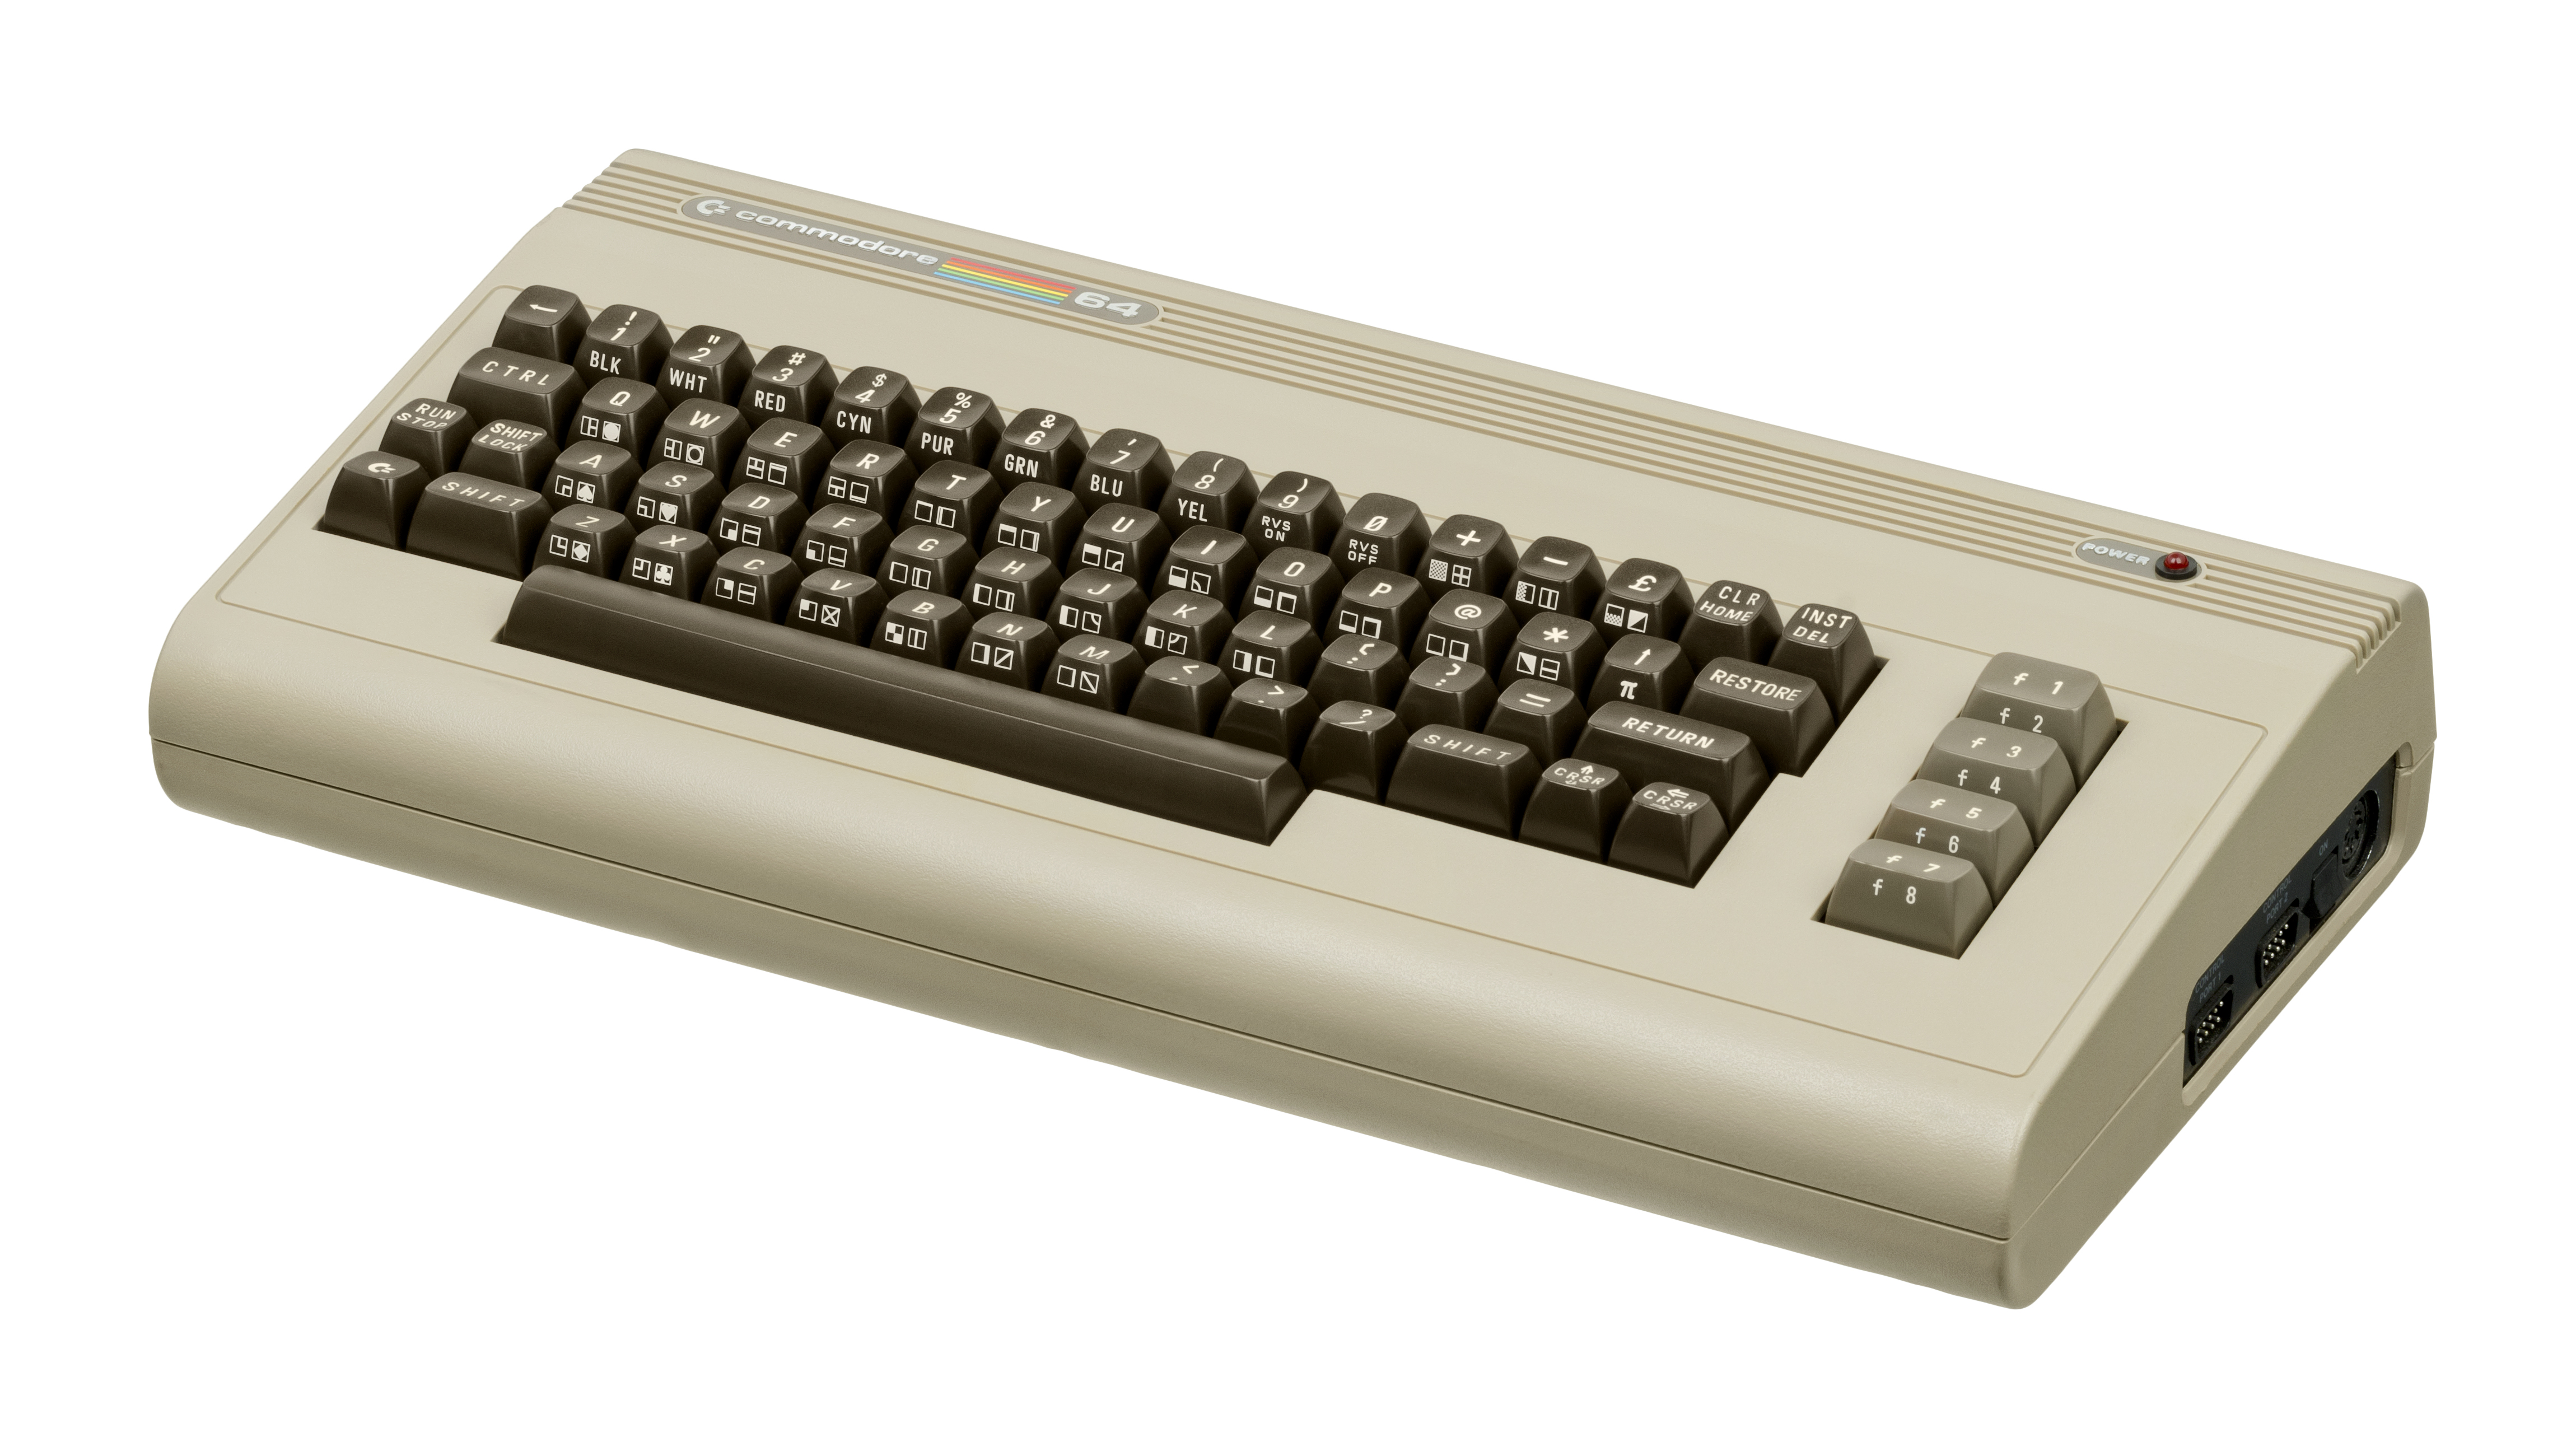 Commodore 64 Product Image